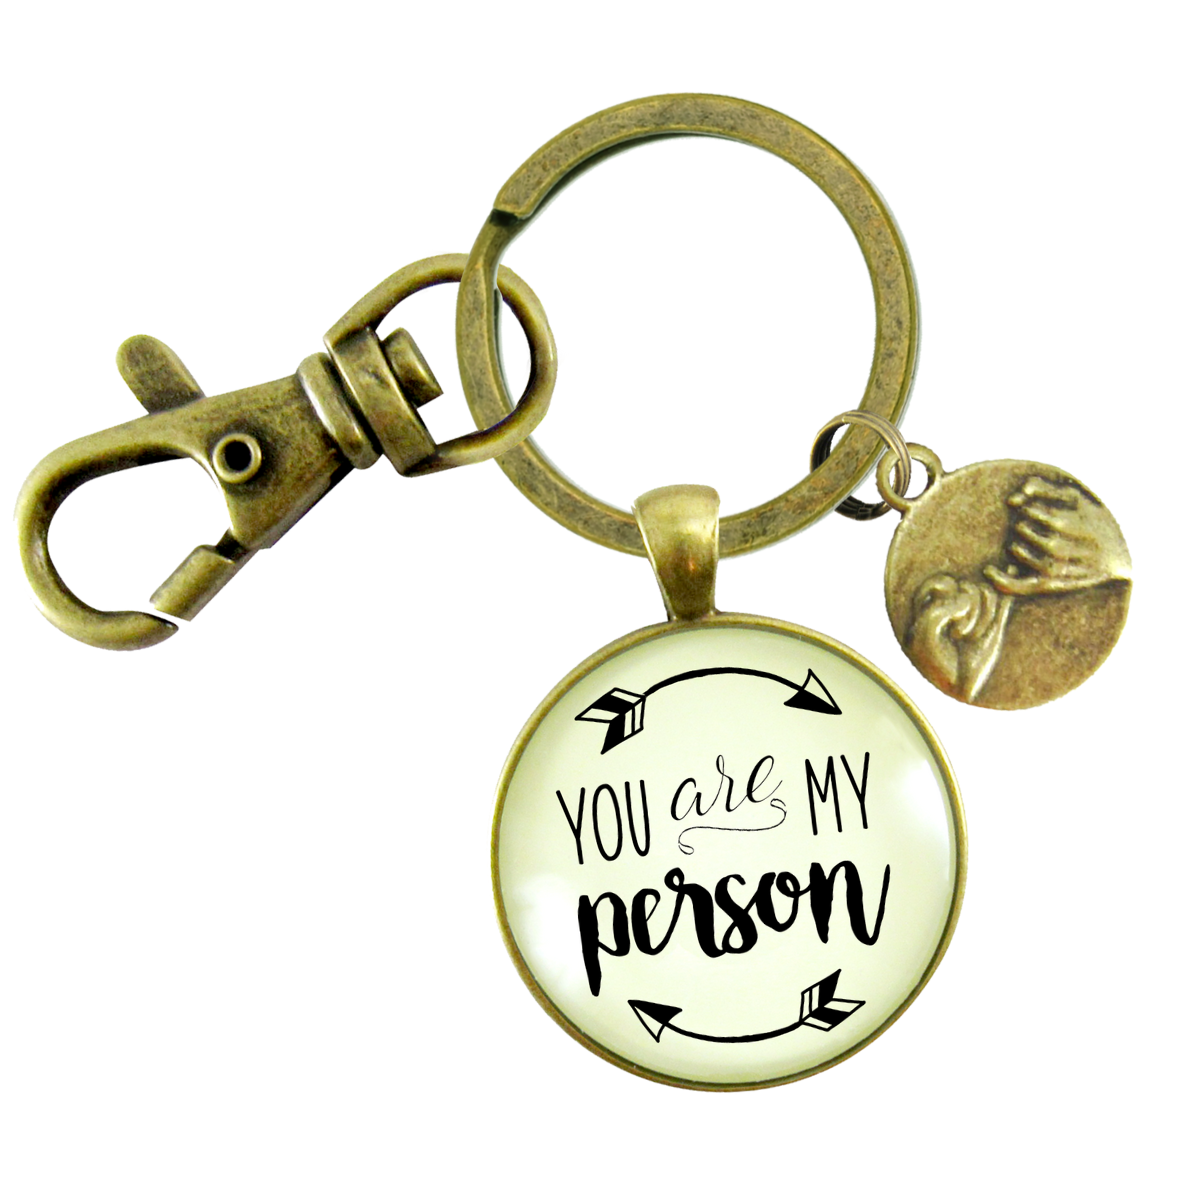 You Are My Person Best Friends Keychain Quote Special Relationship Pinky Promise Gift - Gutsy Goodness Handmade Jewelry;You Are My Person Best Friends Keychain Quote Special Relationship Pinky Promise Gift - Gutsy Goodness Handmade Jewelry Gifts